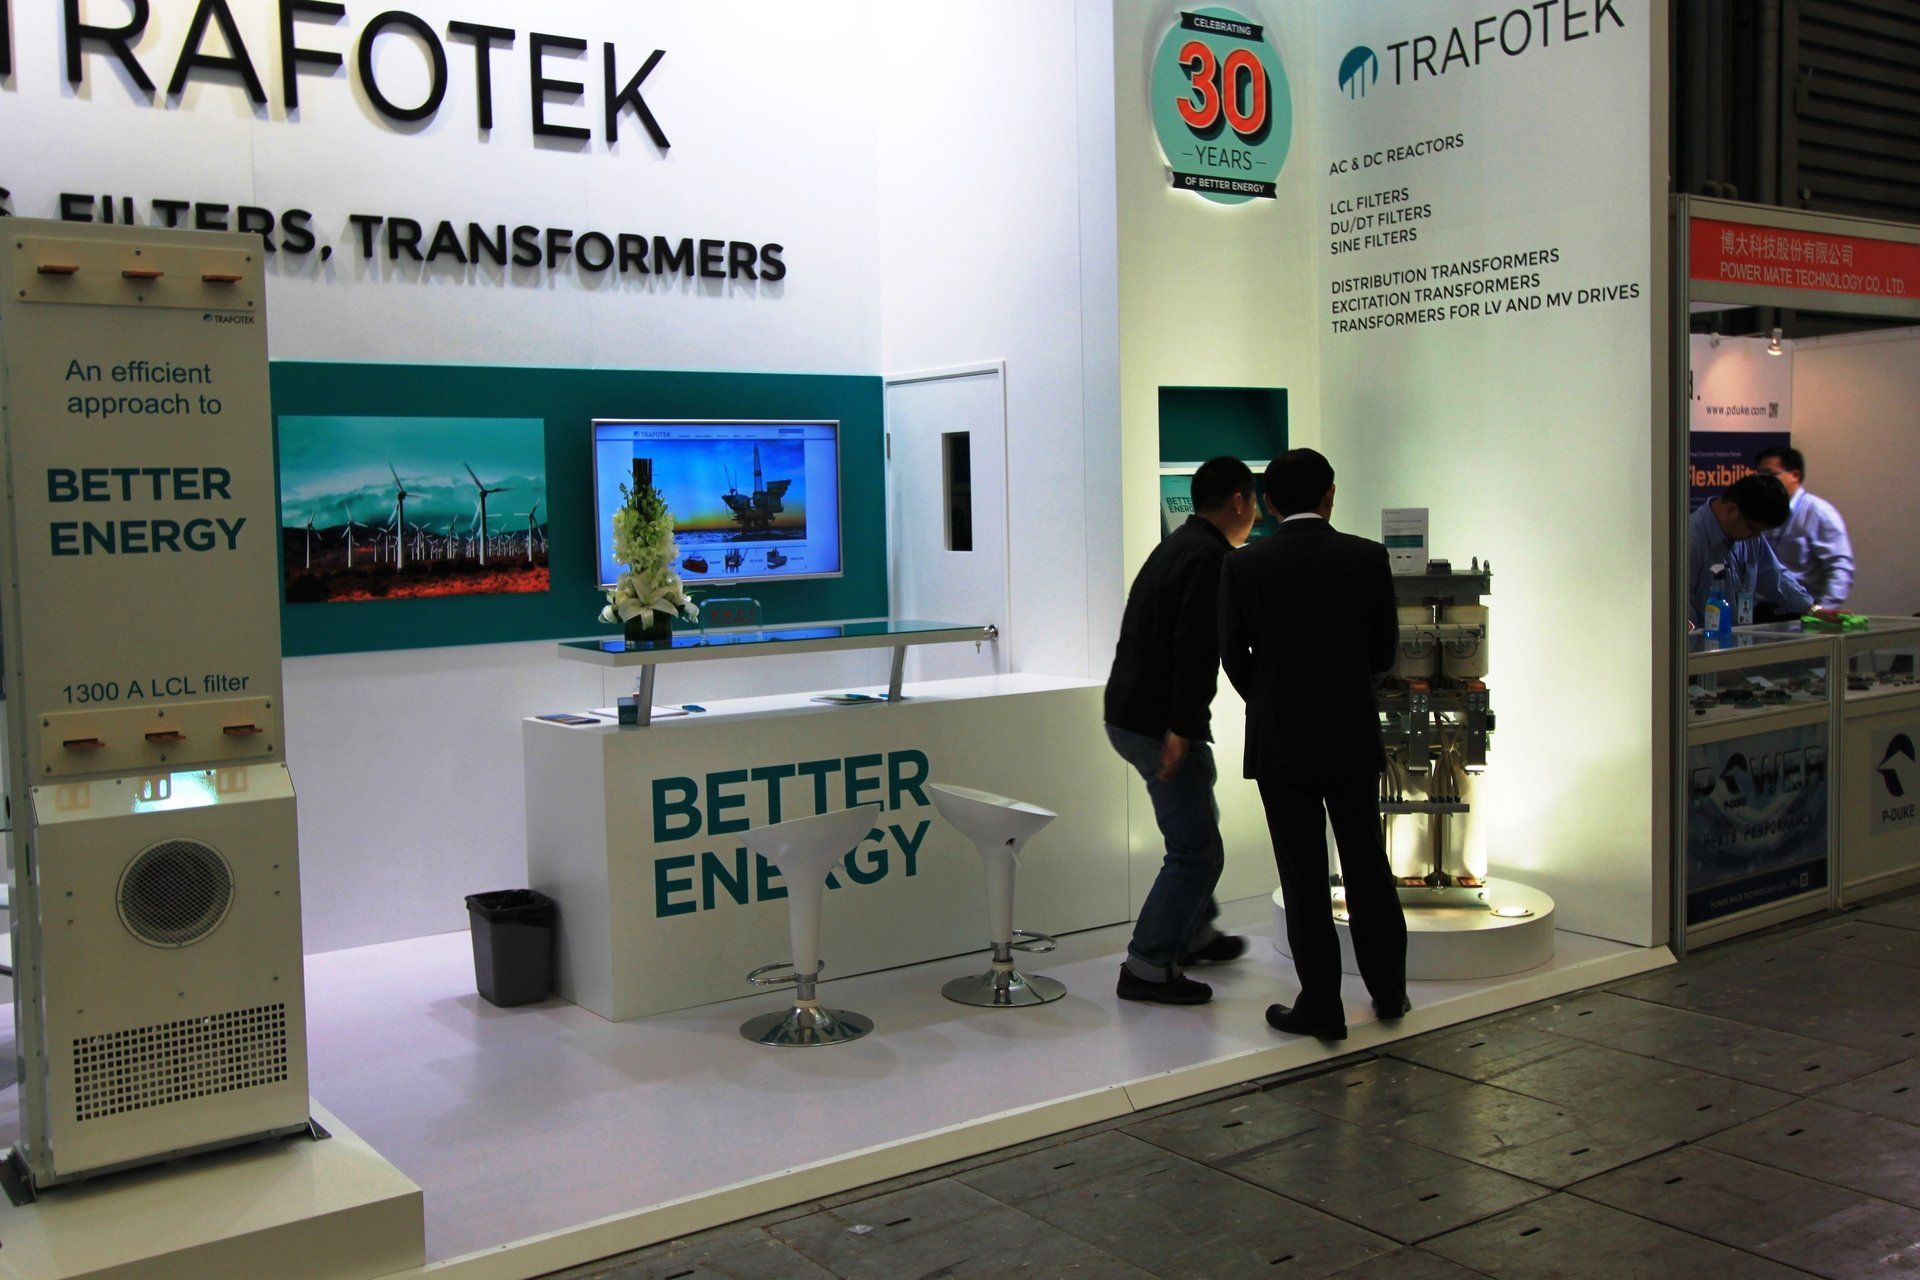 Trafotek @ China International Industry Fair 2013. Booth designed and built by Essential Global Fairs.